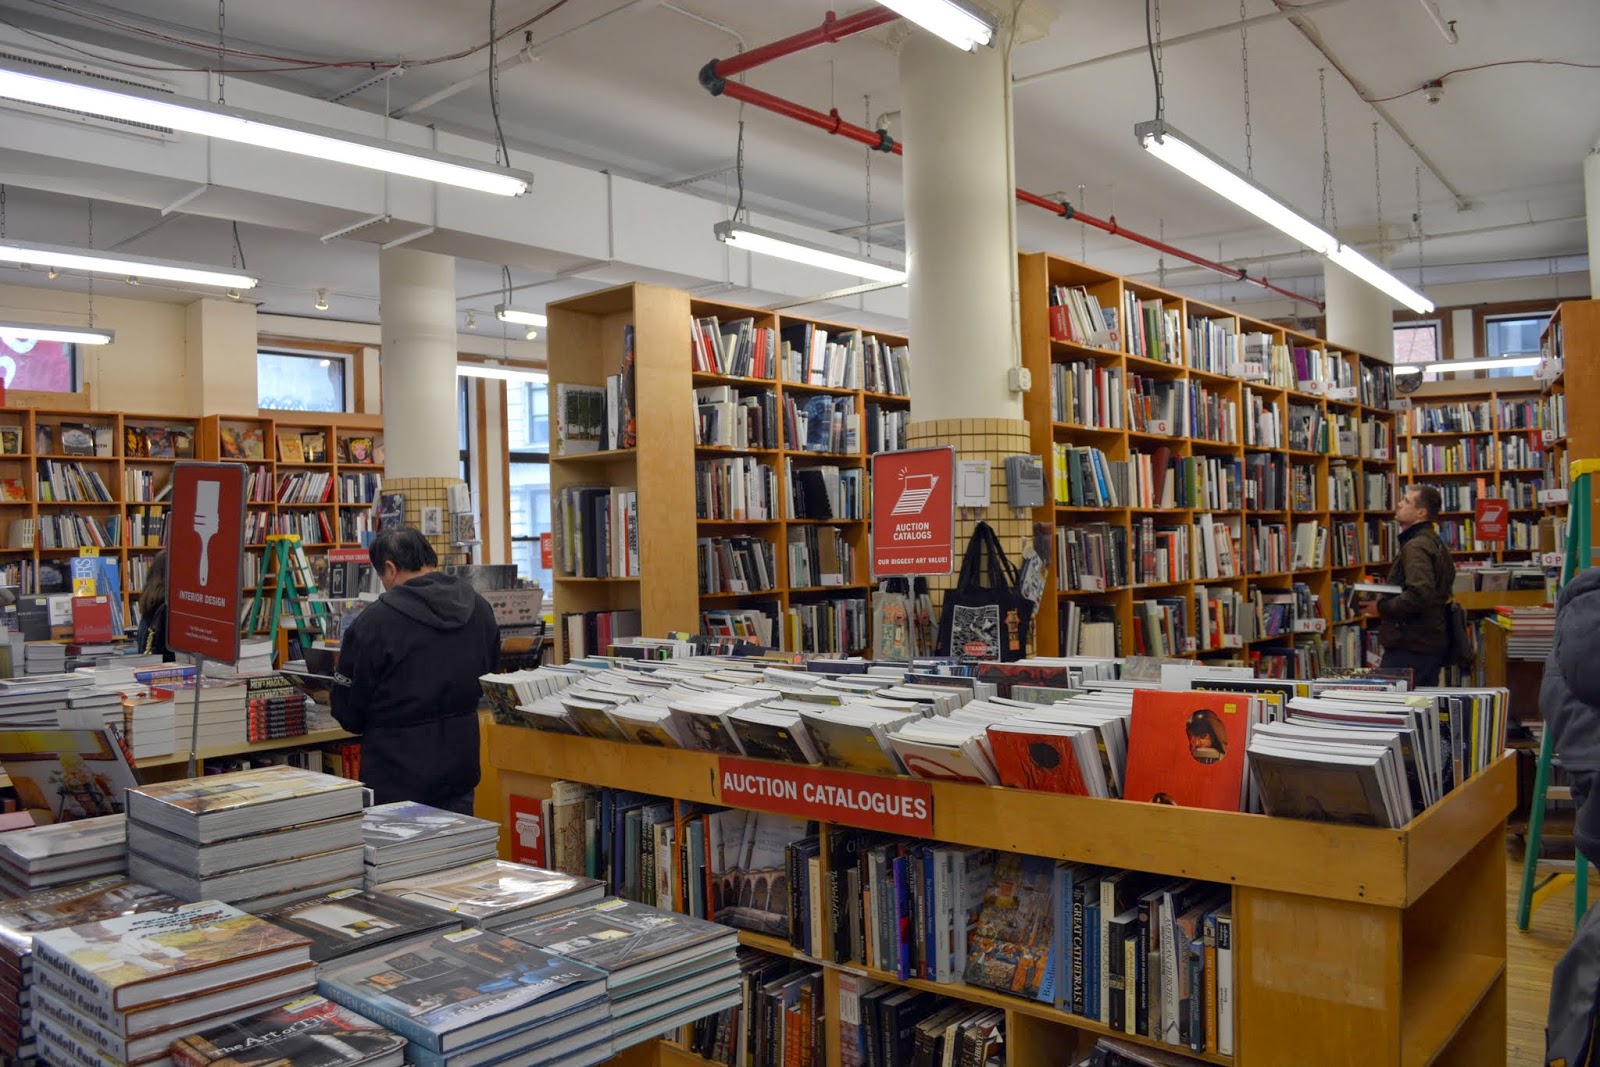 The Strand Book Store Events